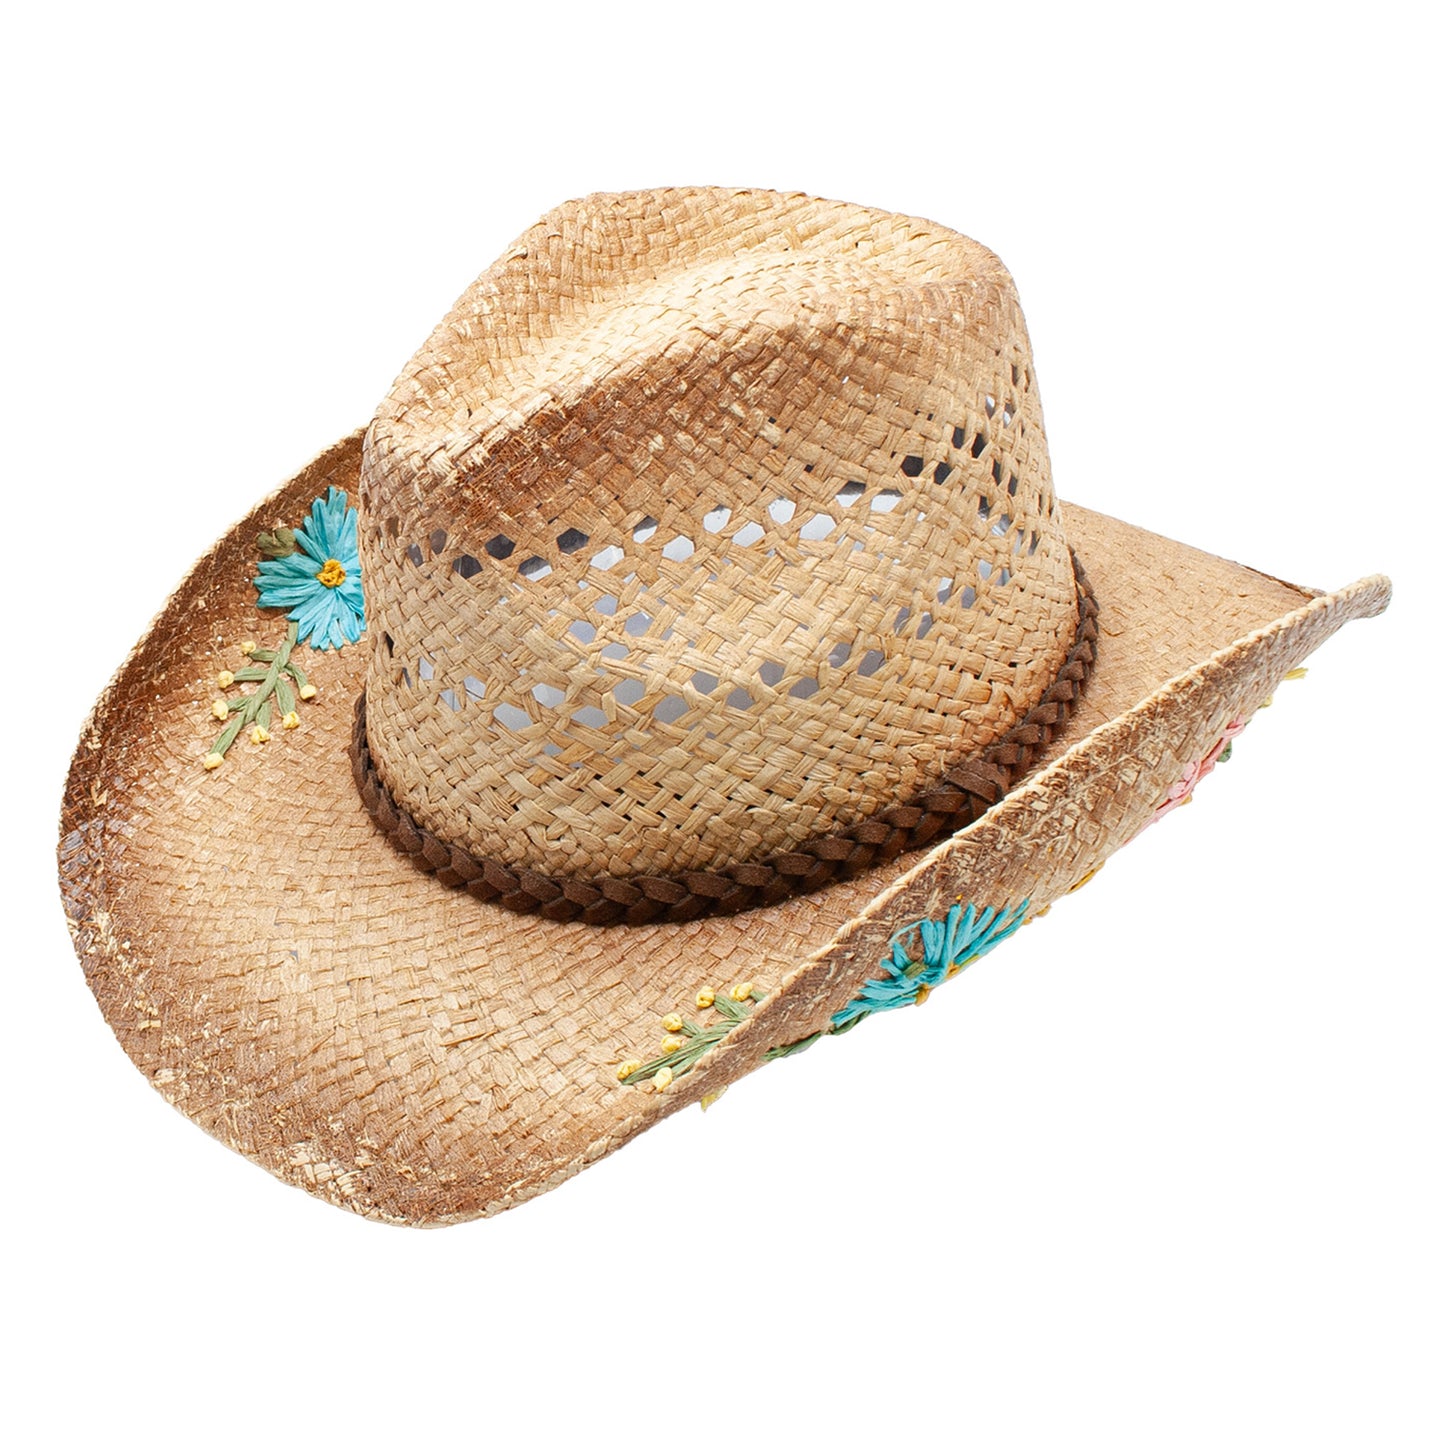 Emma Teastained Cowboy Hat by Peter Grimm - Bourbon Cowgirl